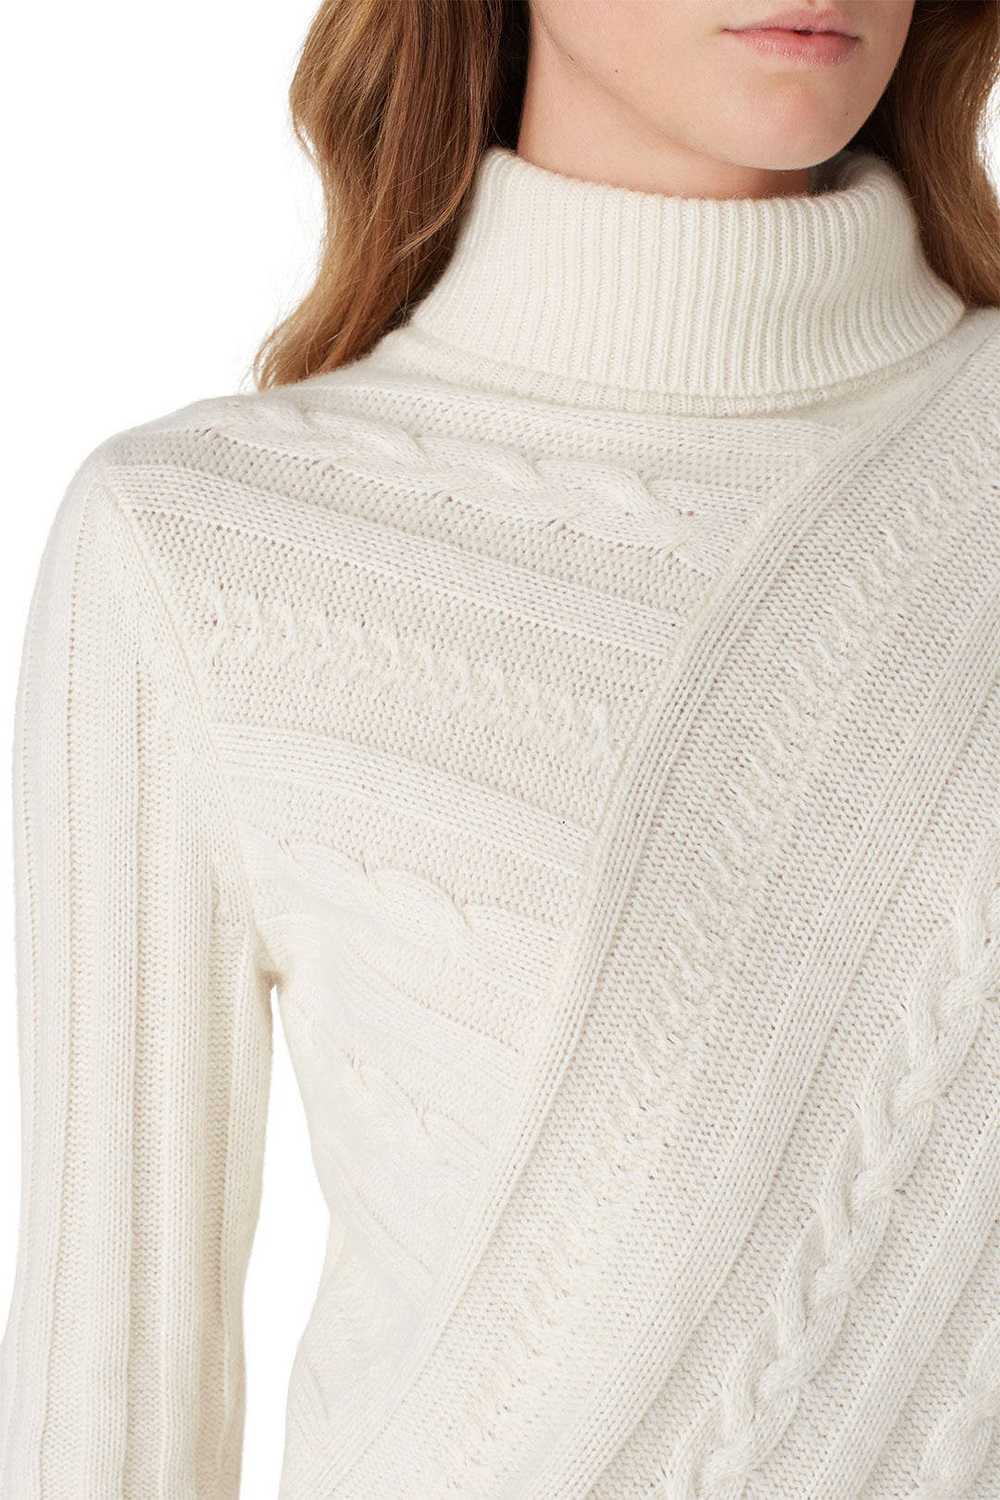 Milly Asymmetrical Cable Sweater - image 4